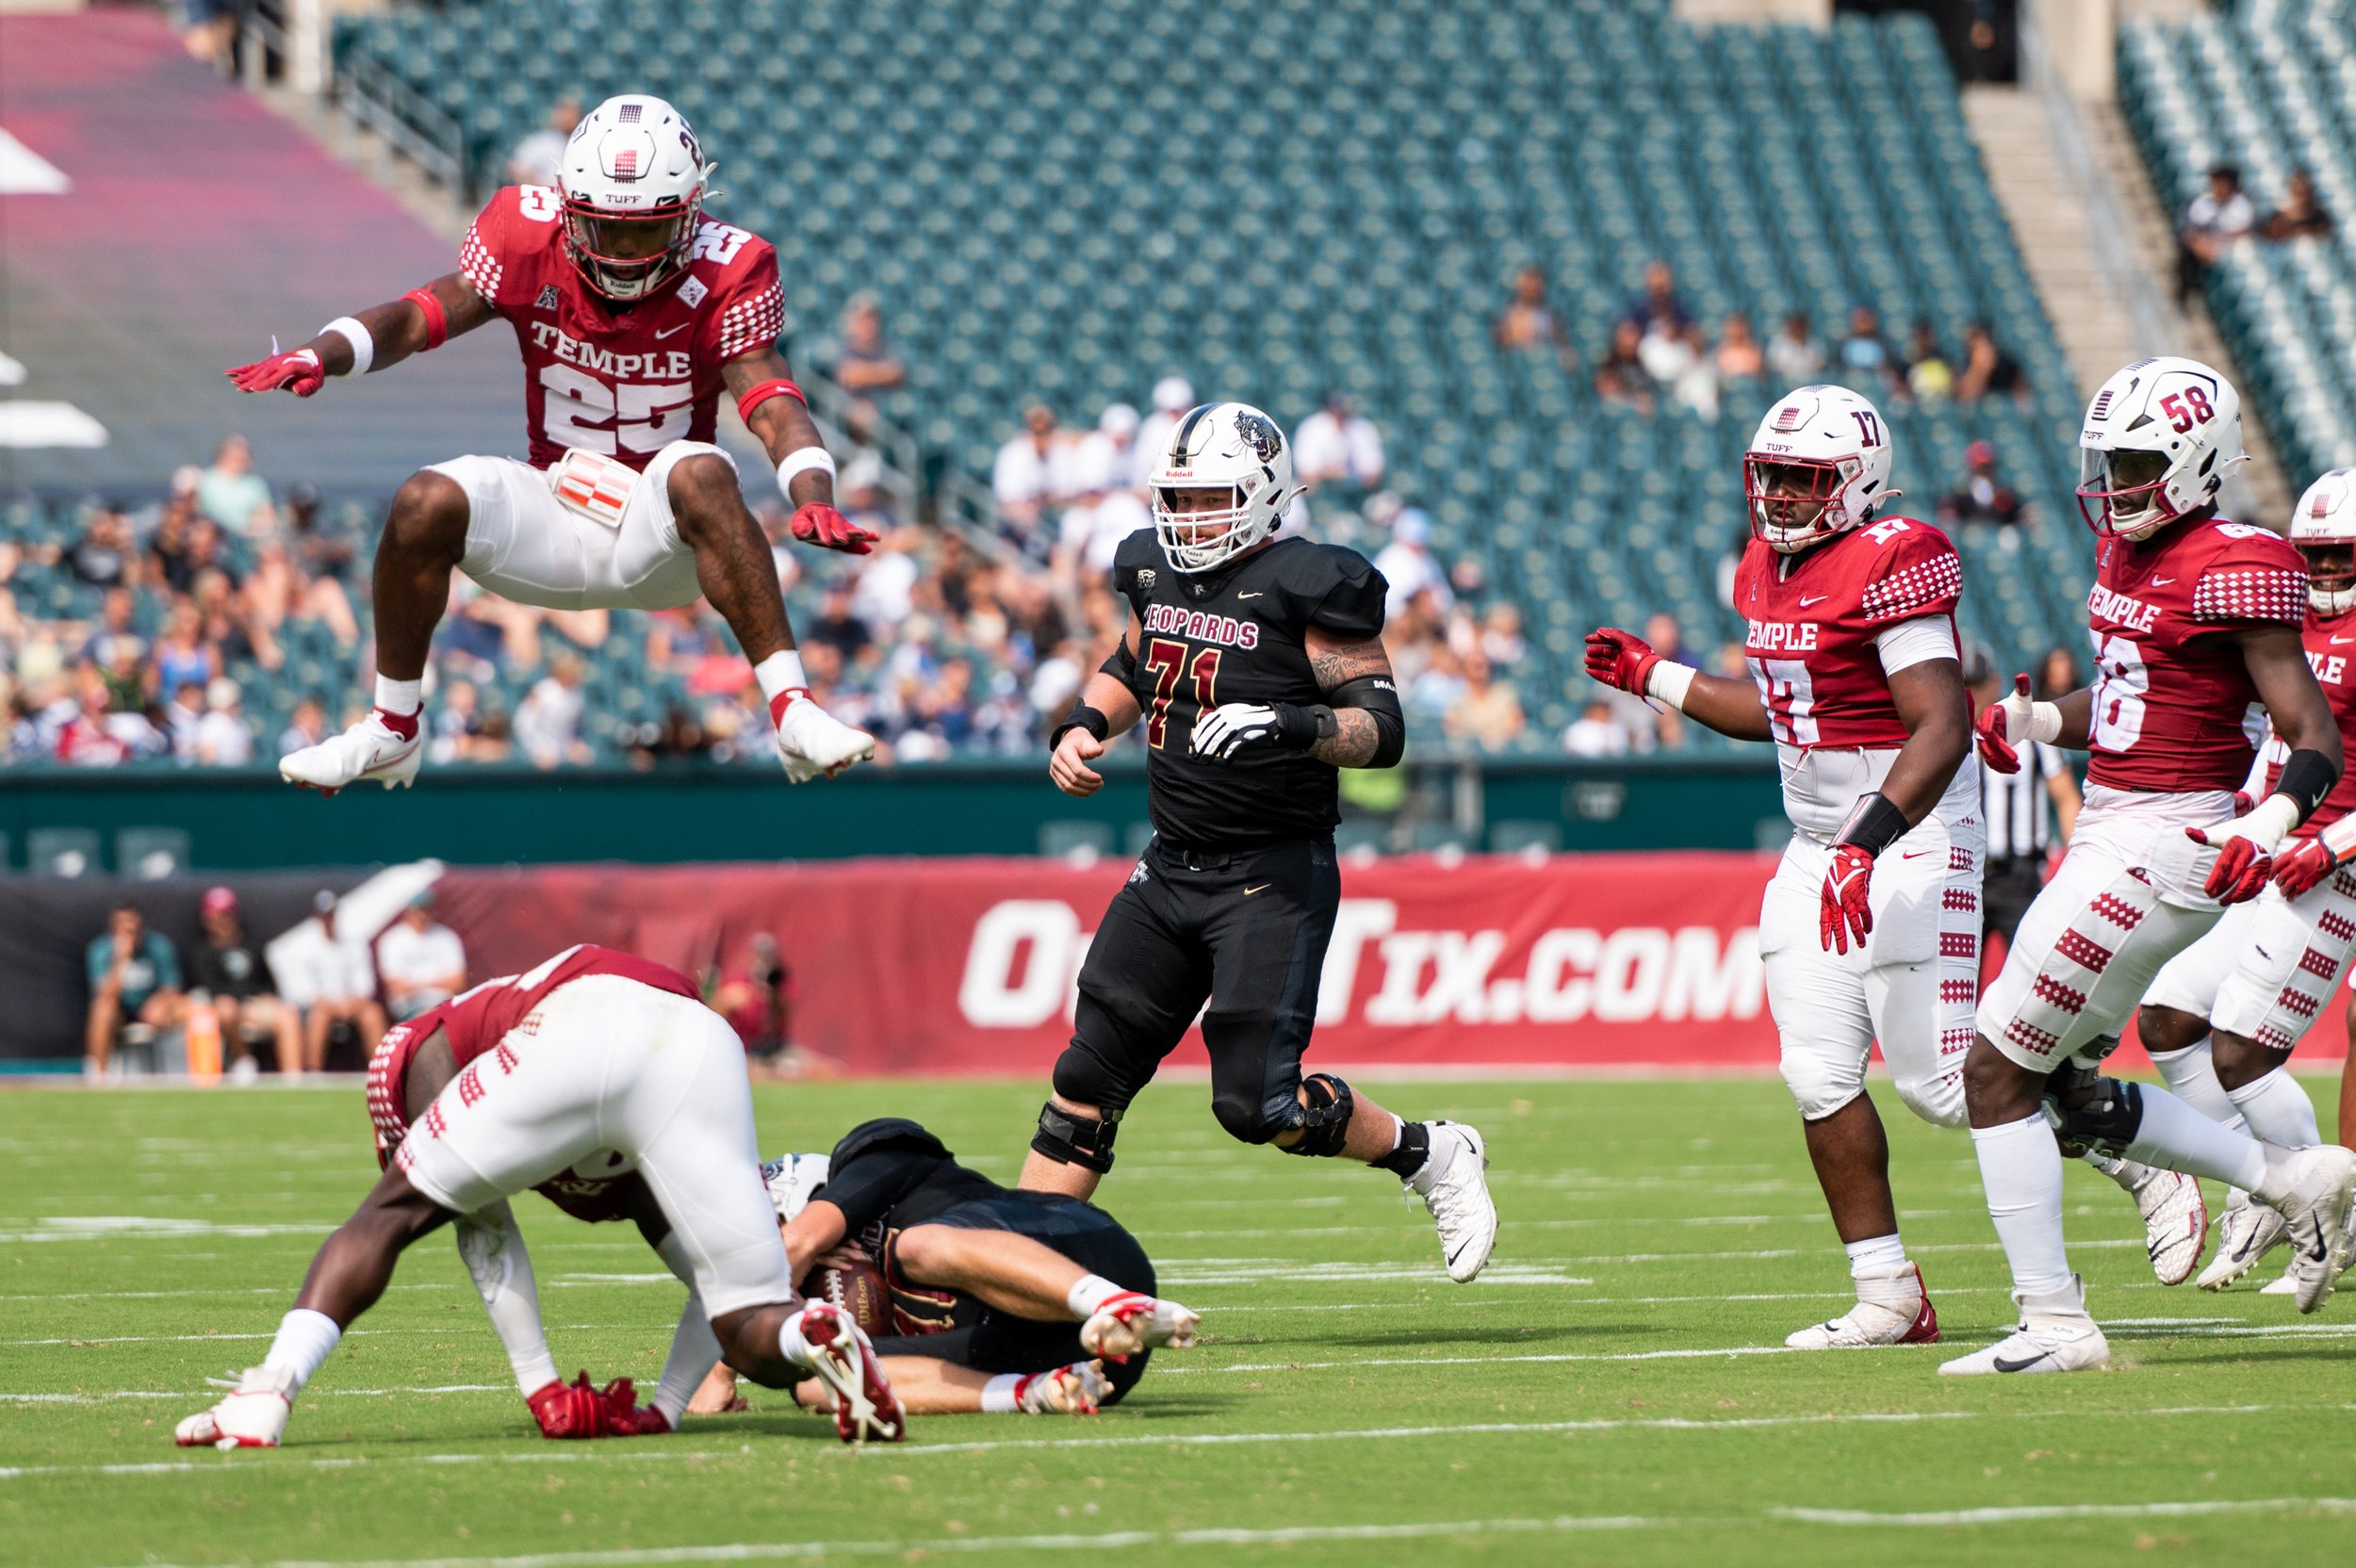   Alex Odom, safety for the Temple Owls, jumps out of the way of a tackle during the game against Lafayette College at Lincoln Financial Field on Saturday, Sept. 10, 2022. Temple won 30-14.  